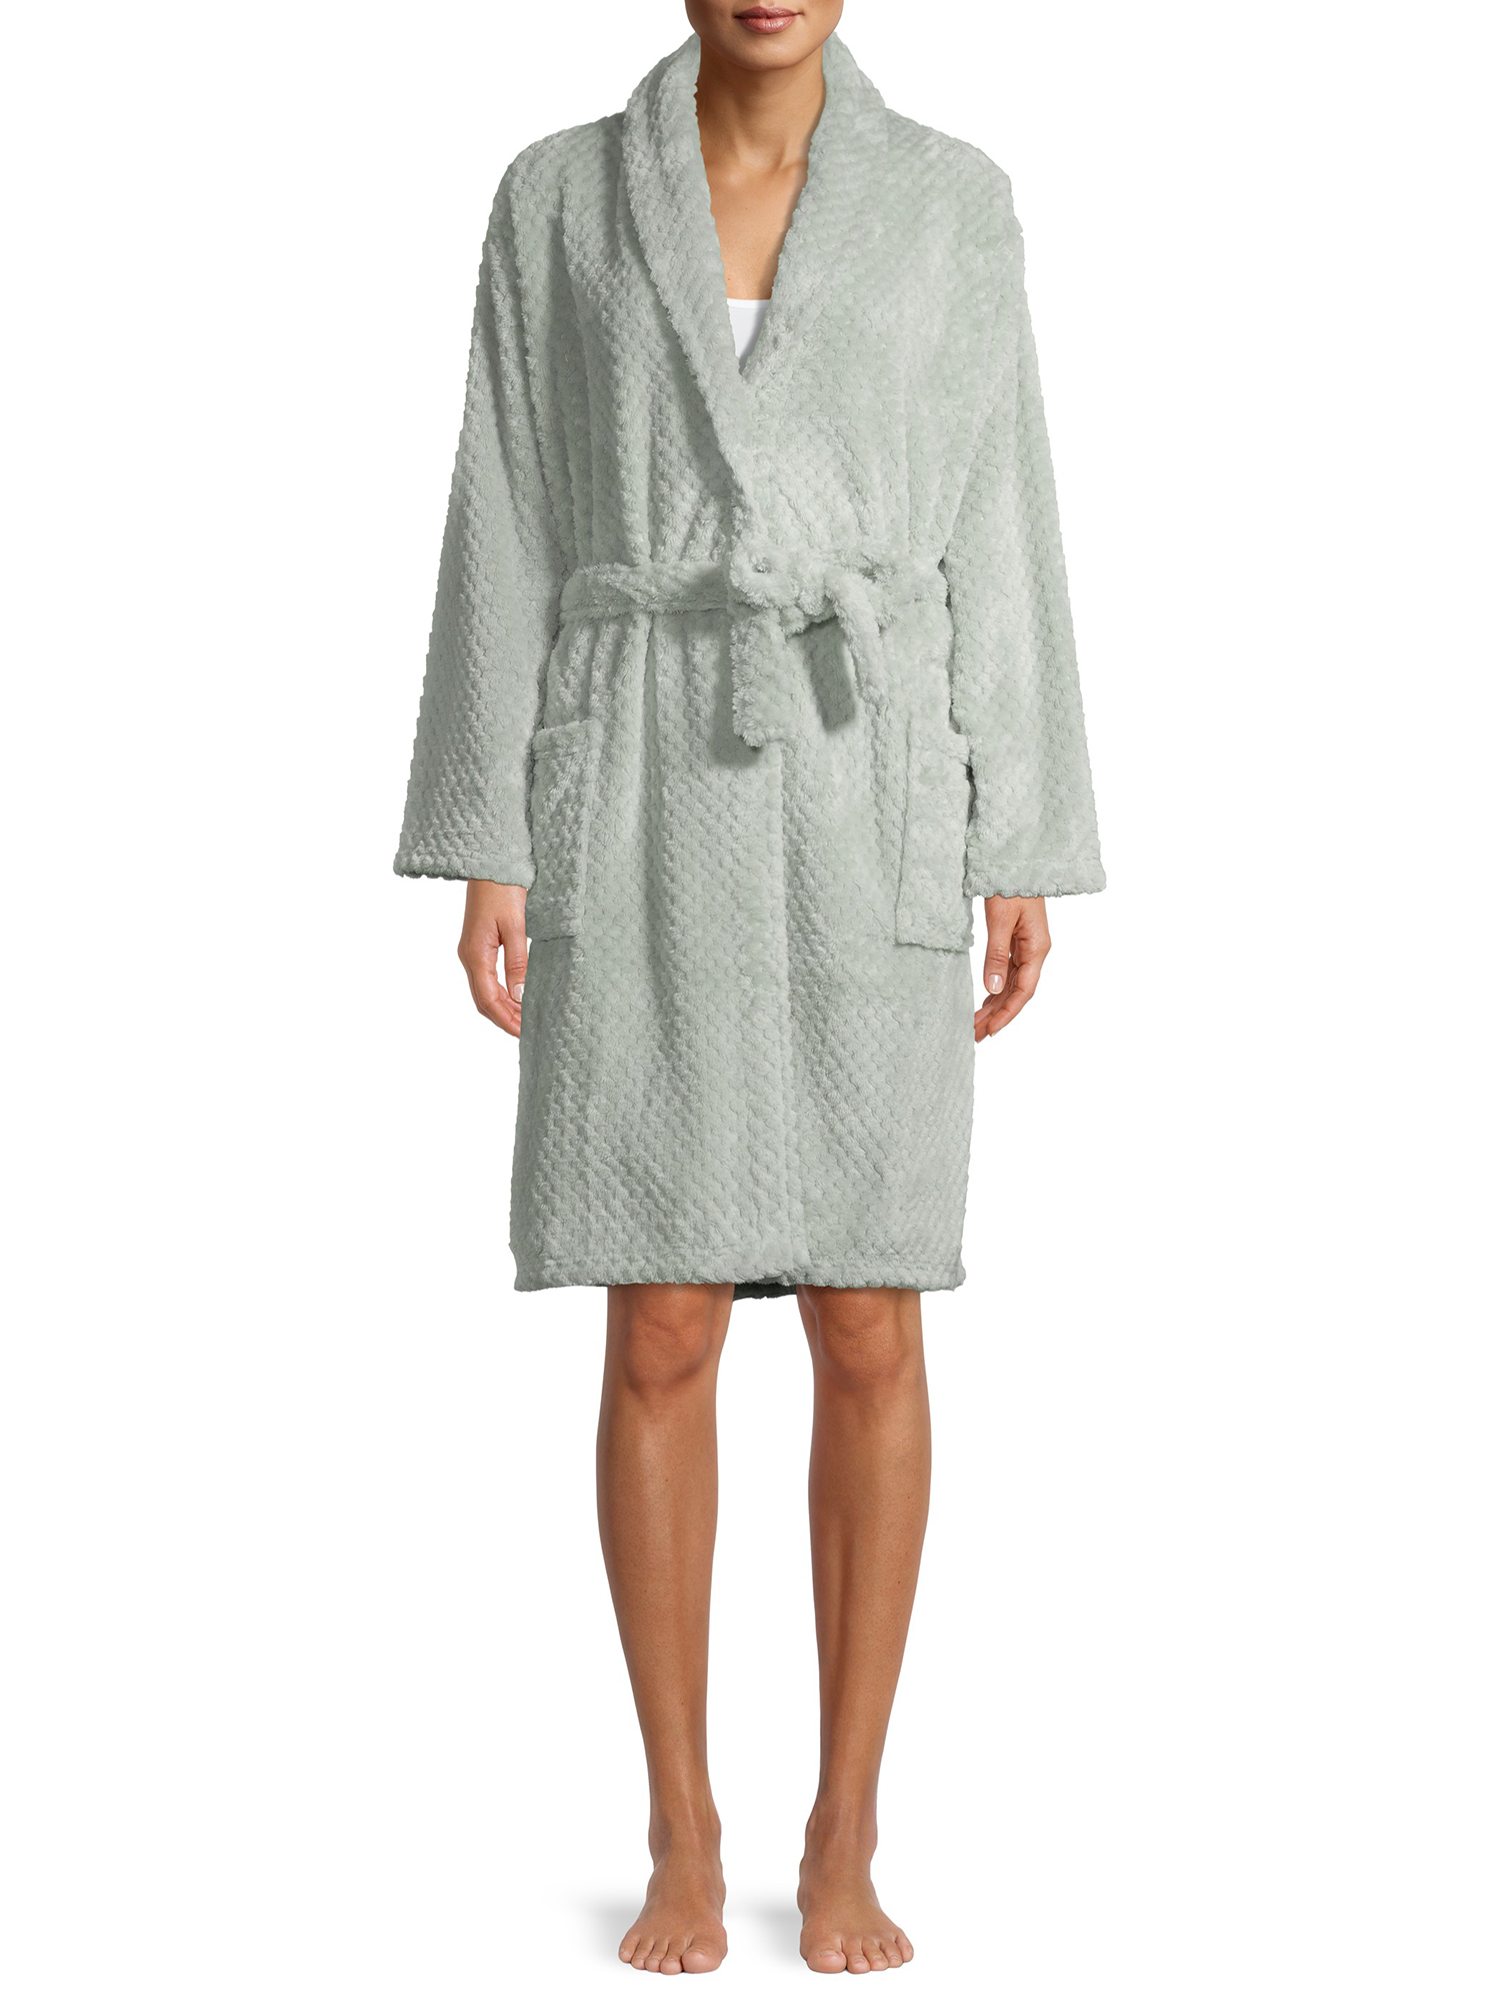 The Cozy Corner Club Durable Easy Care Textured Evening Robe (Women's), 1 Pack - image 1 of 7